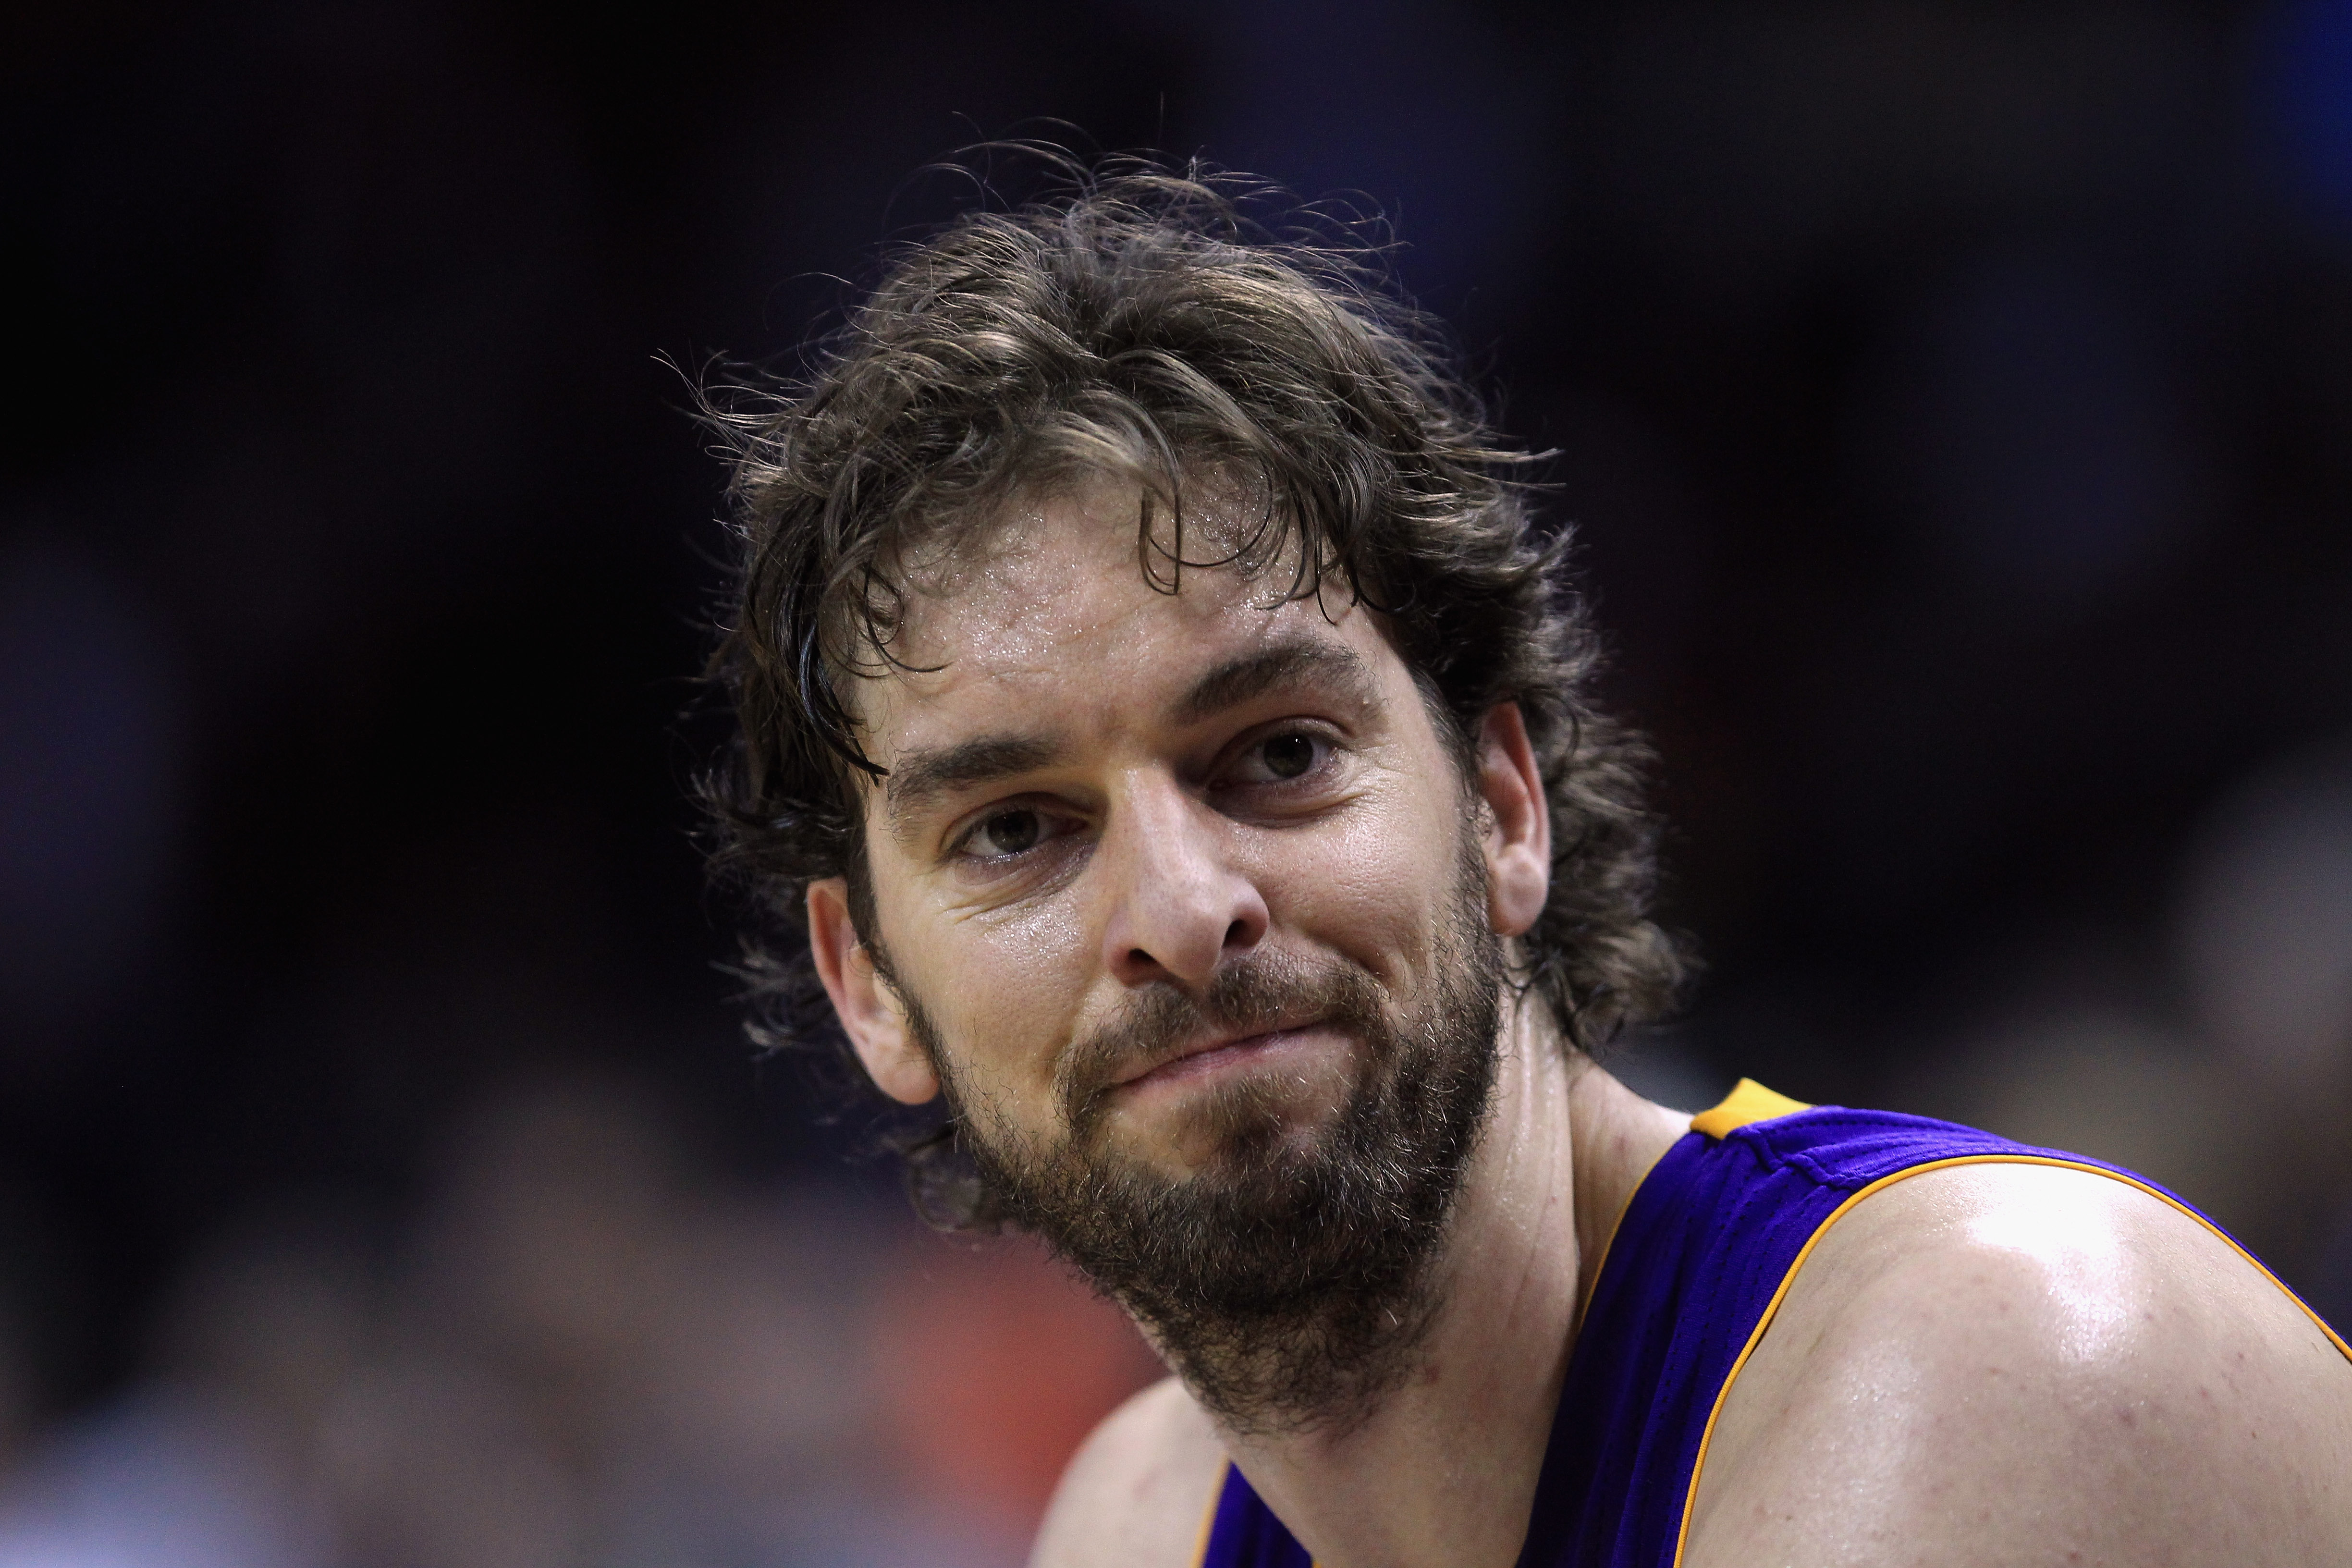 CHARLOTTE, NC - FEBRUARY 14:  Pau Gasol #16 of the Los Angeles Lakers reacts as he sits on the bench during their game against the Charlotte Bobcats at Time Warner Cable Arena on February 14, 2011 in Charlotte, North Carolina. NOTE TO USER: User expressly